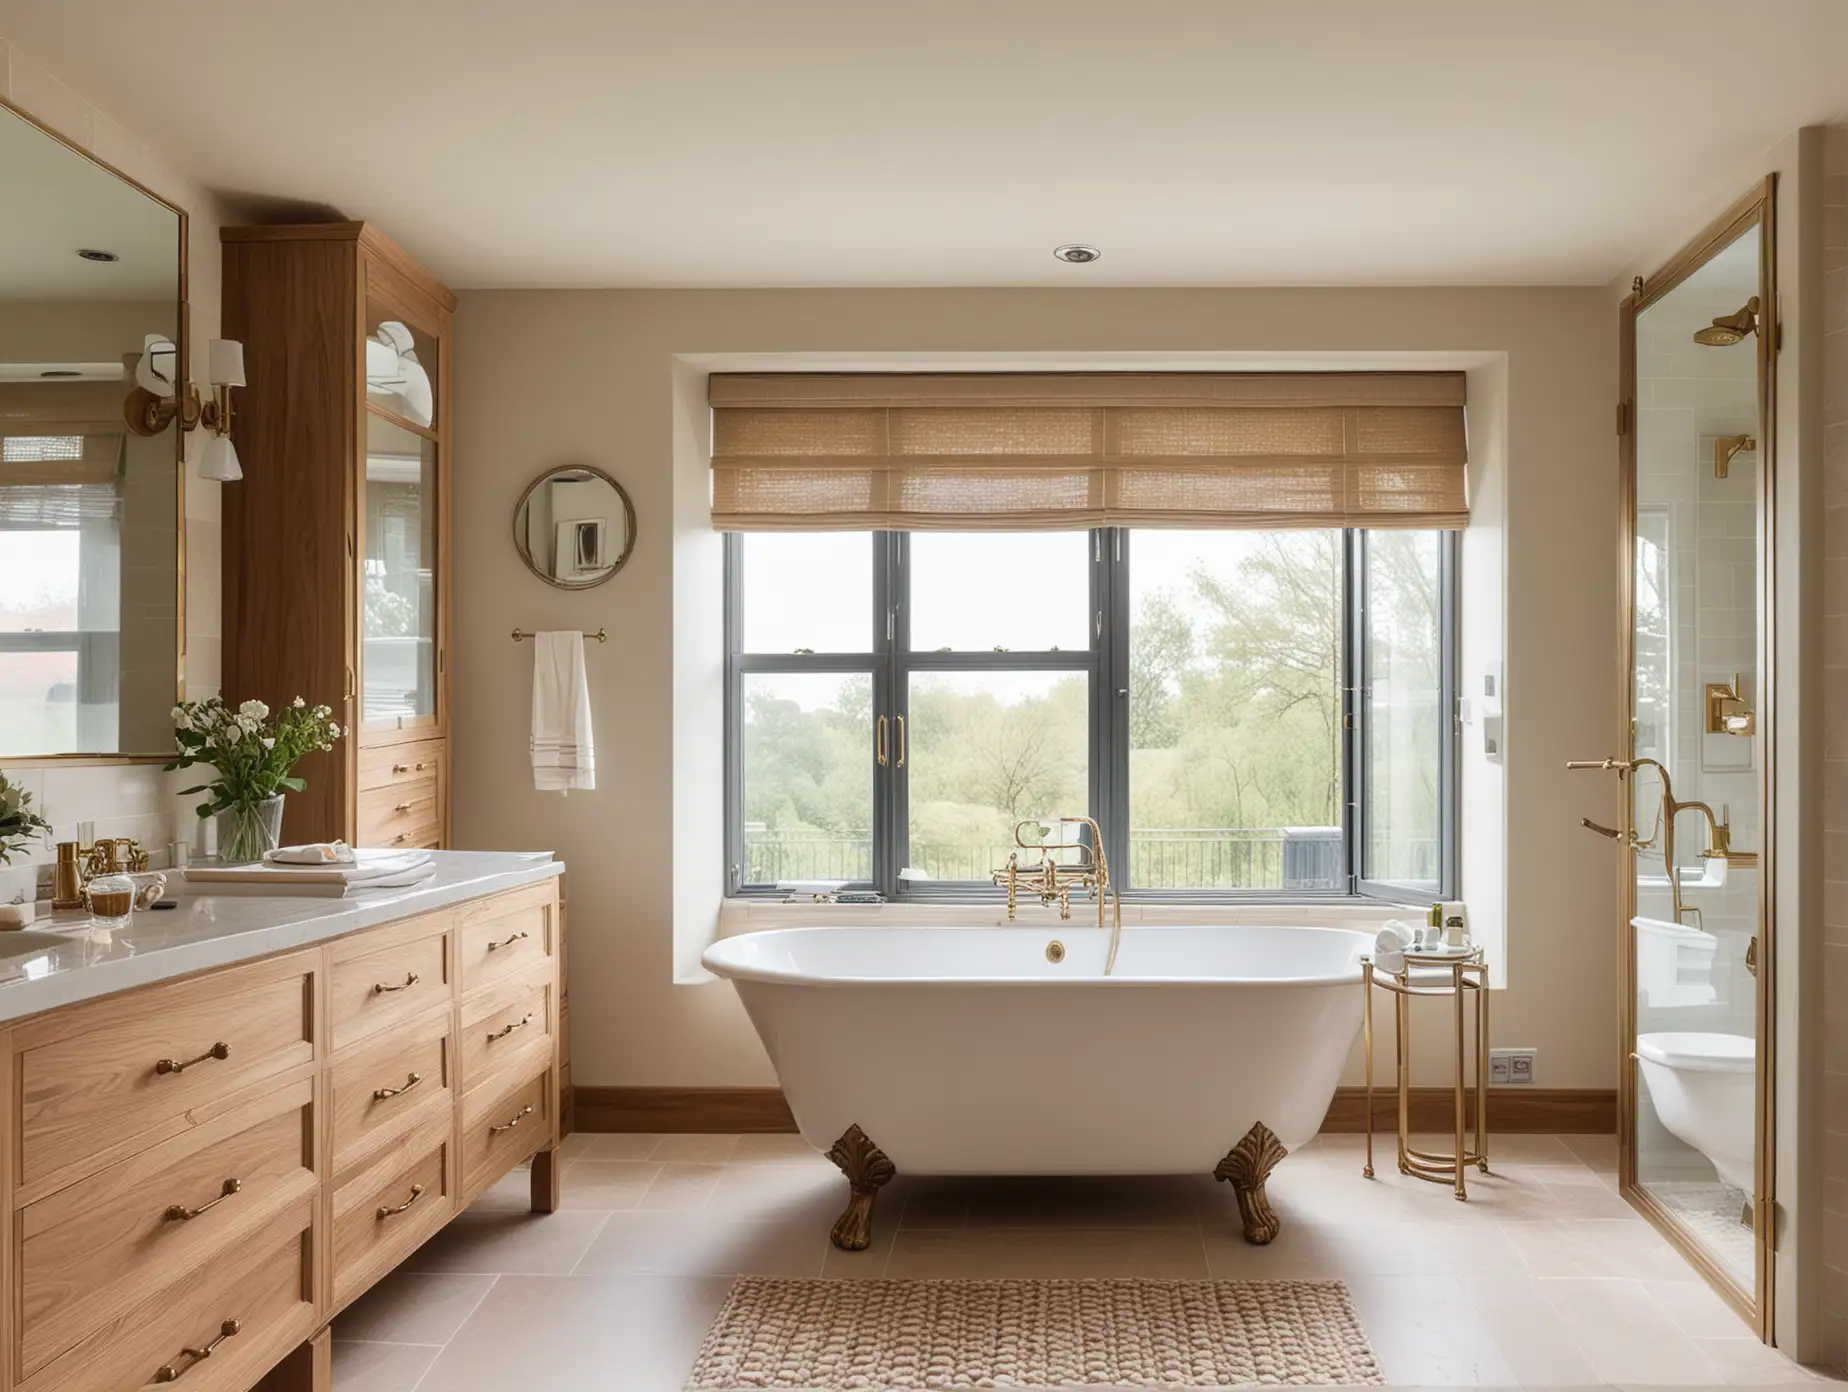 a modern farmhouse bathroom with a large claw foot bath with brass floor bath filler, a double sink vanity made of walnut wood with beige quartzite counter and brass lever basin taps, a large shower with brass-framed glass doors, a window with linen roman blind, limestone floor tiles, beige limewash walls,